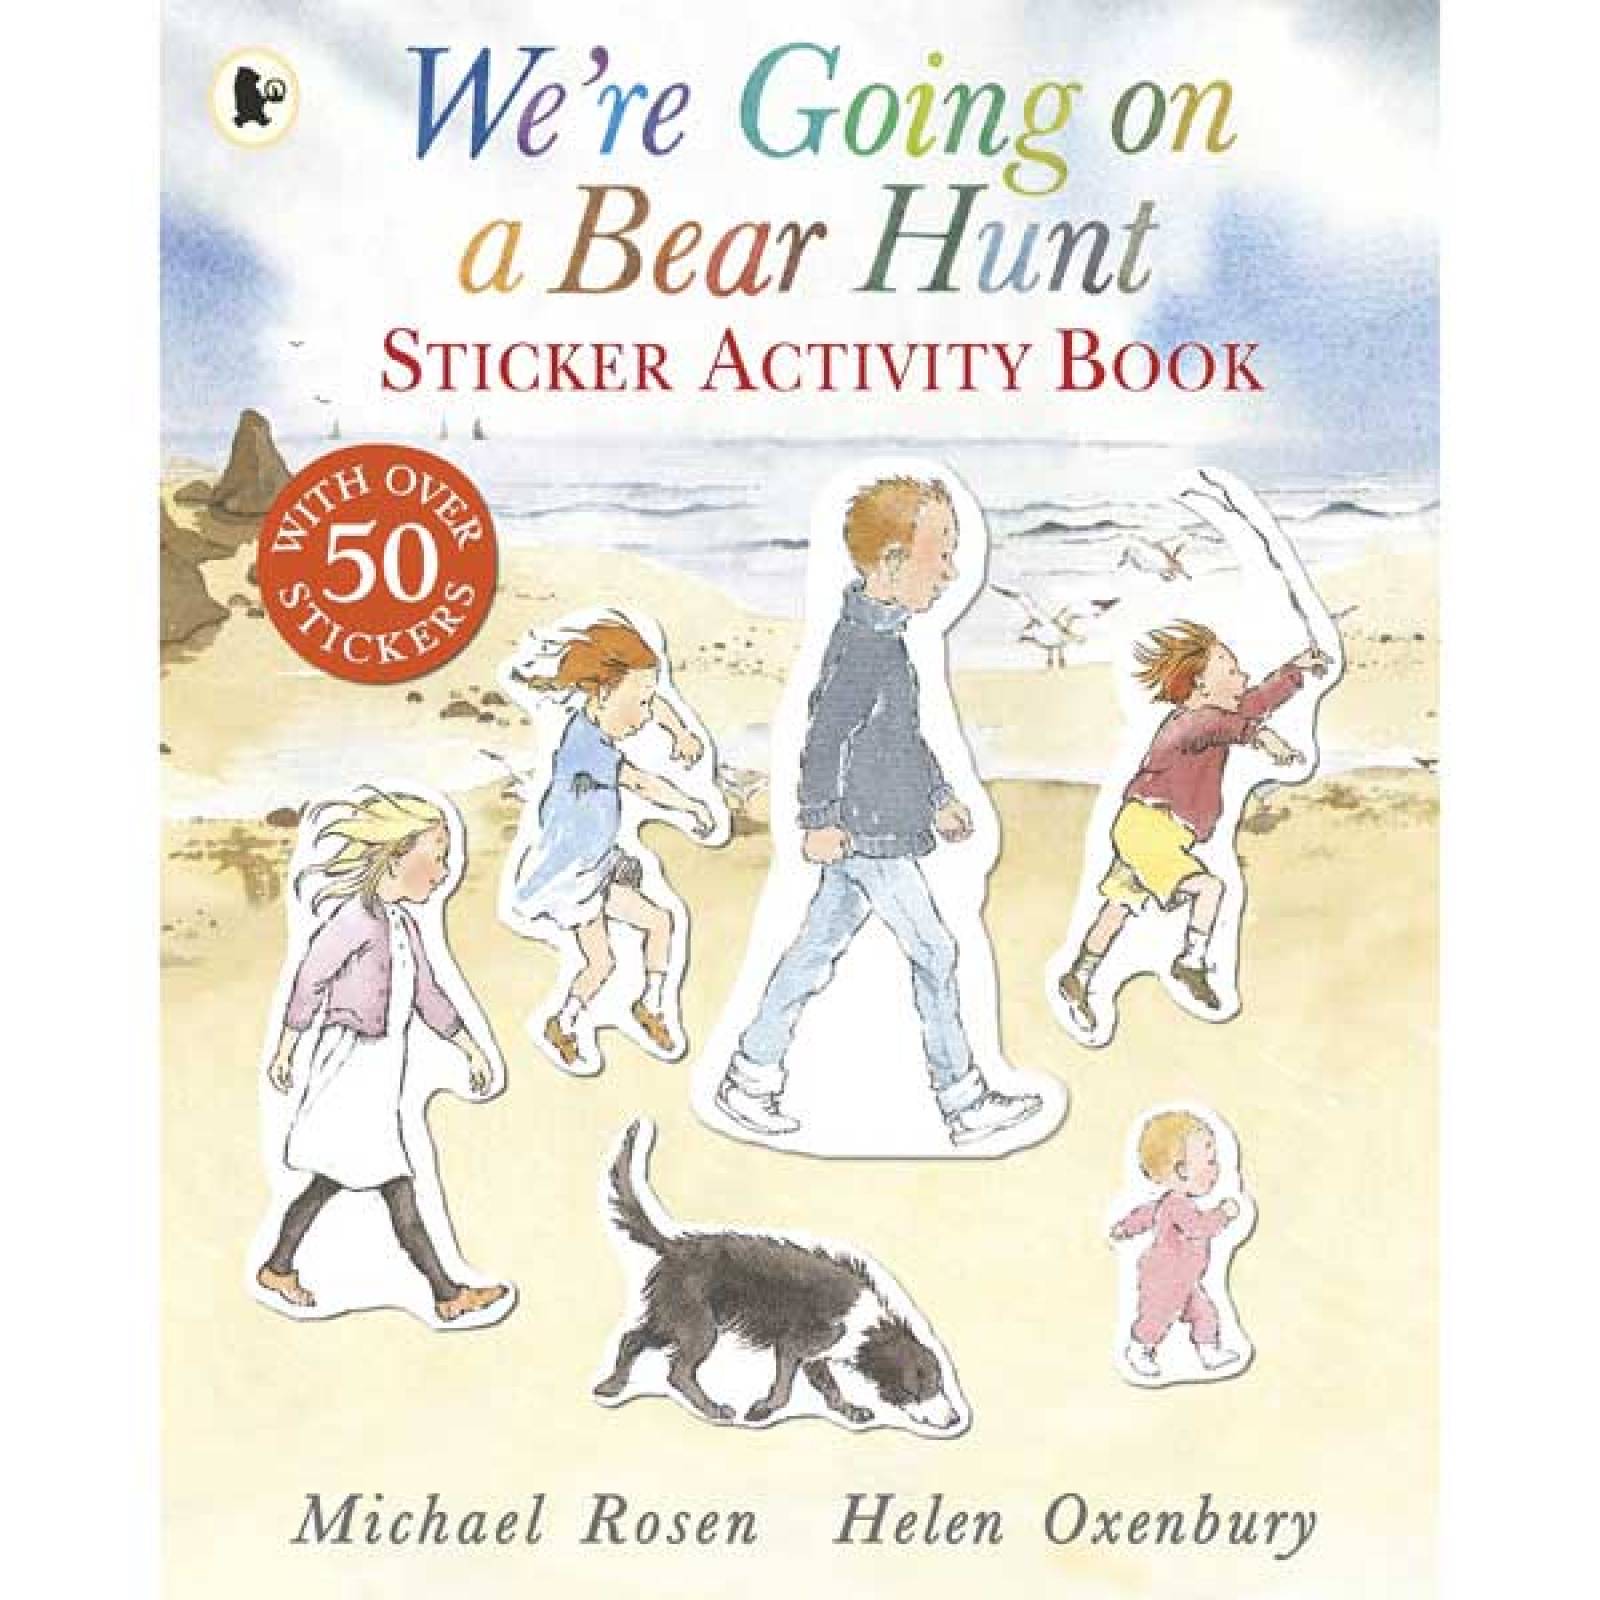 We're Going On A Bear Hunt Sticker Activity Book